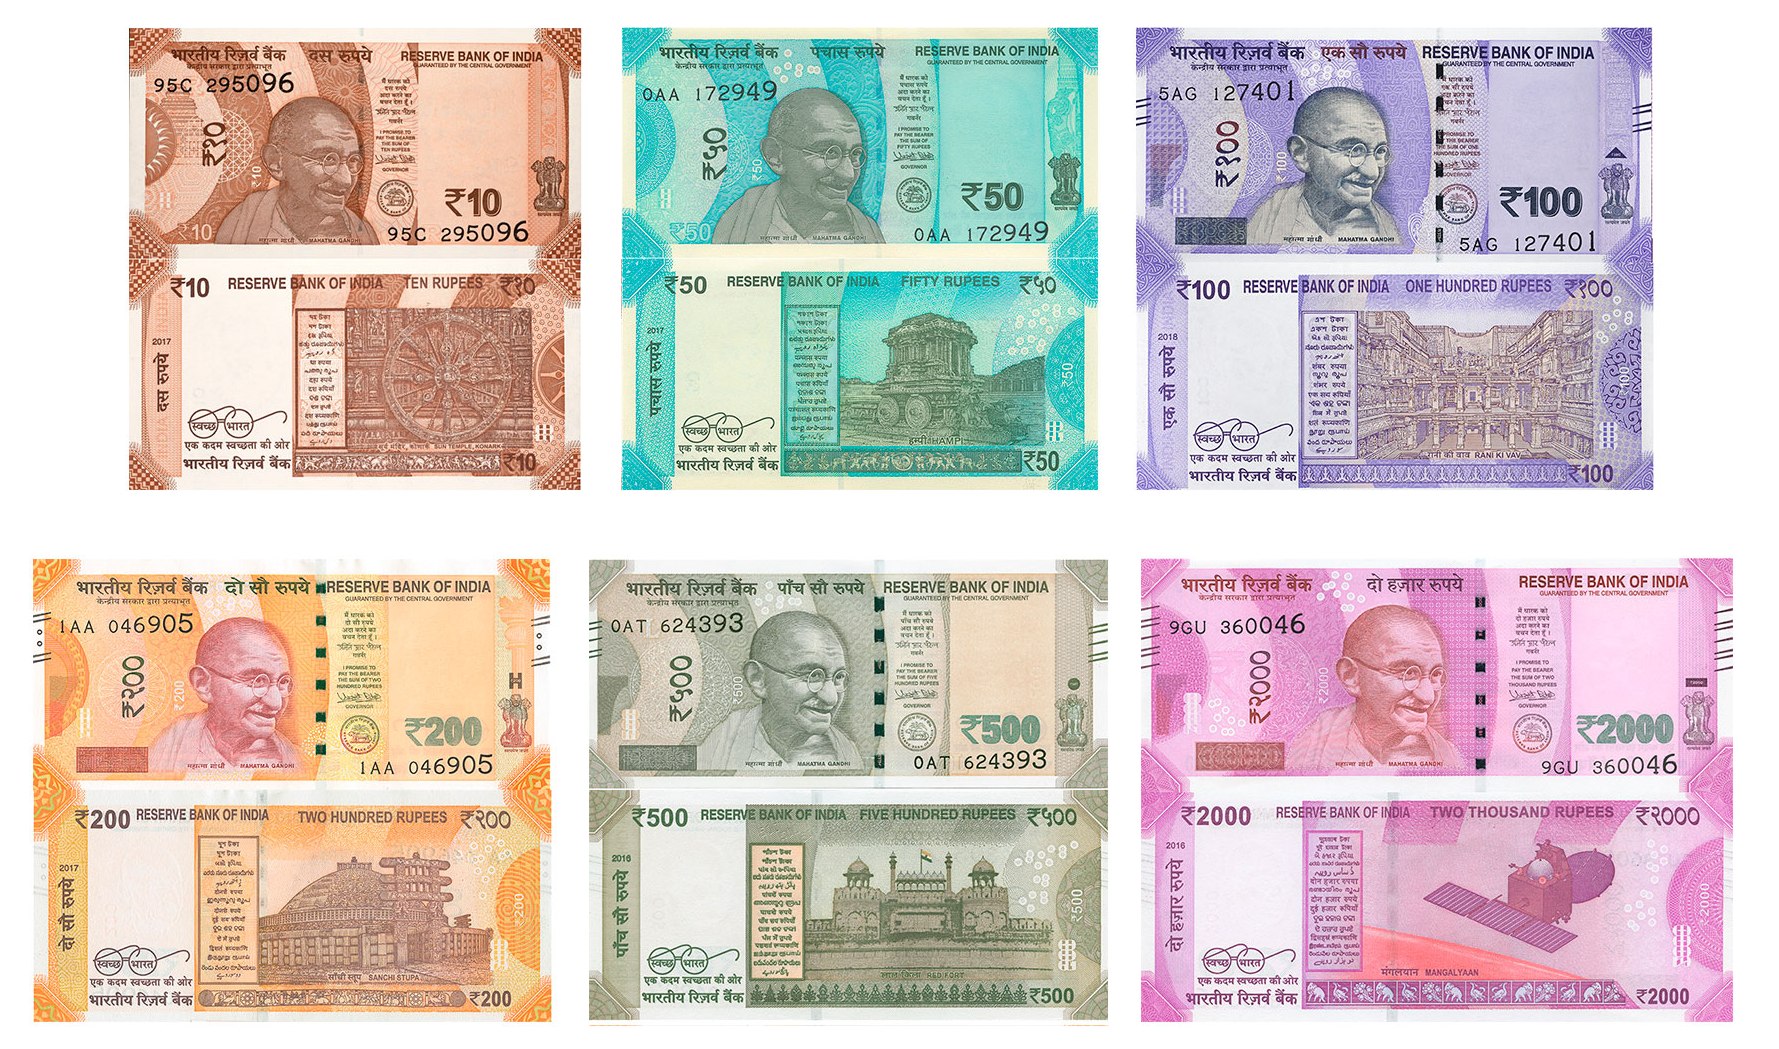 Pictures In Indian Currency